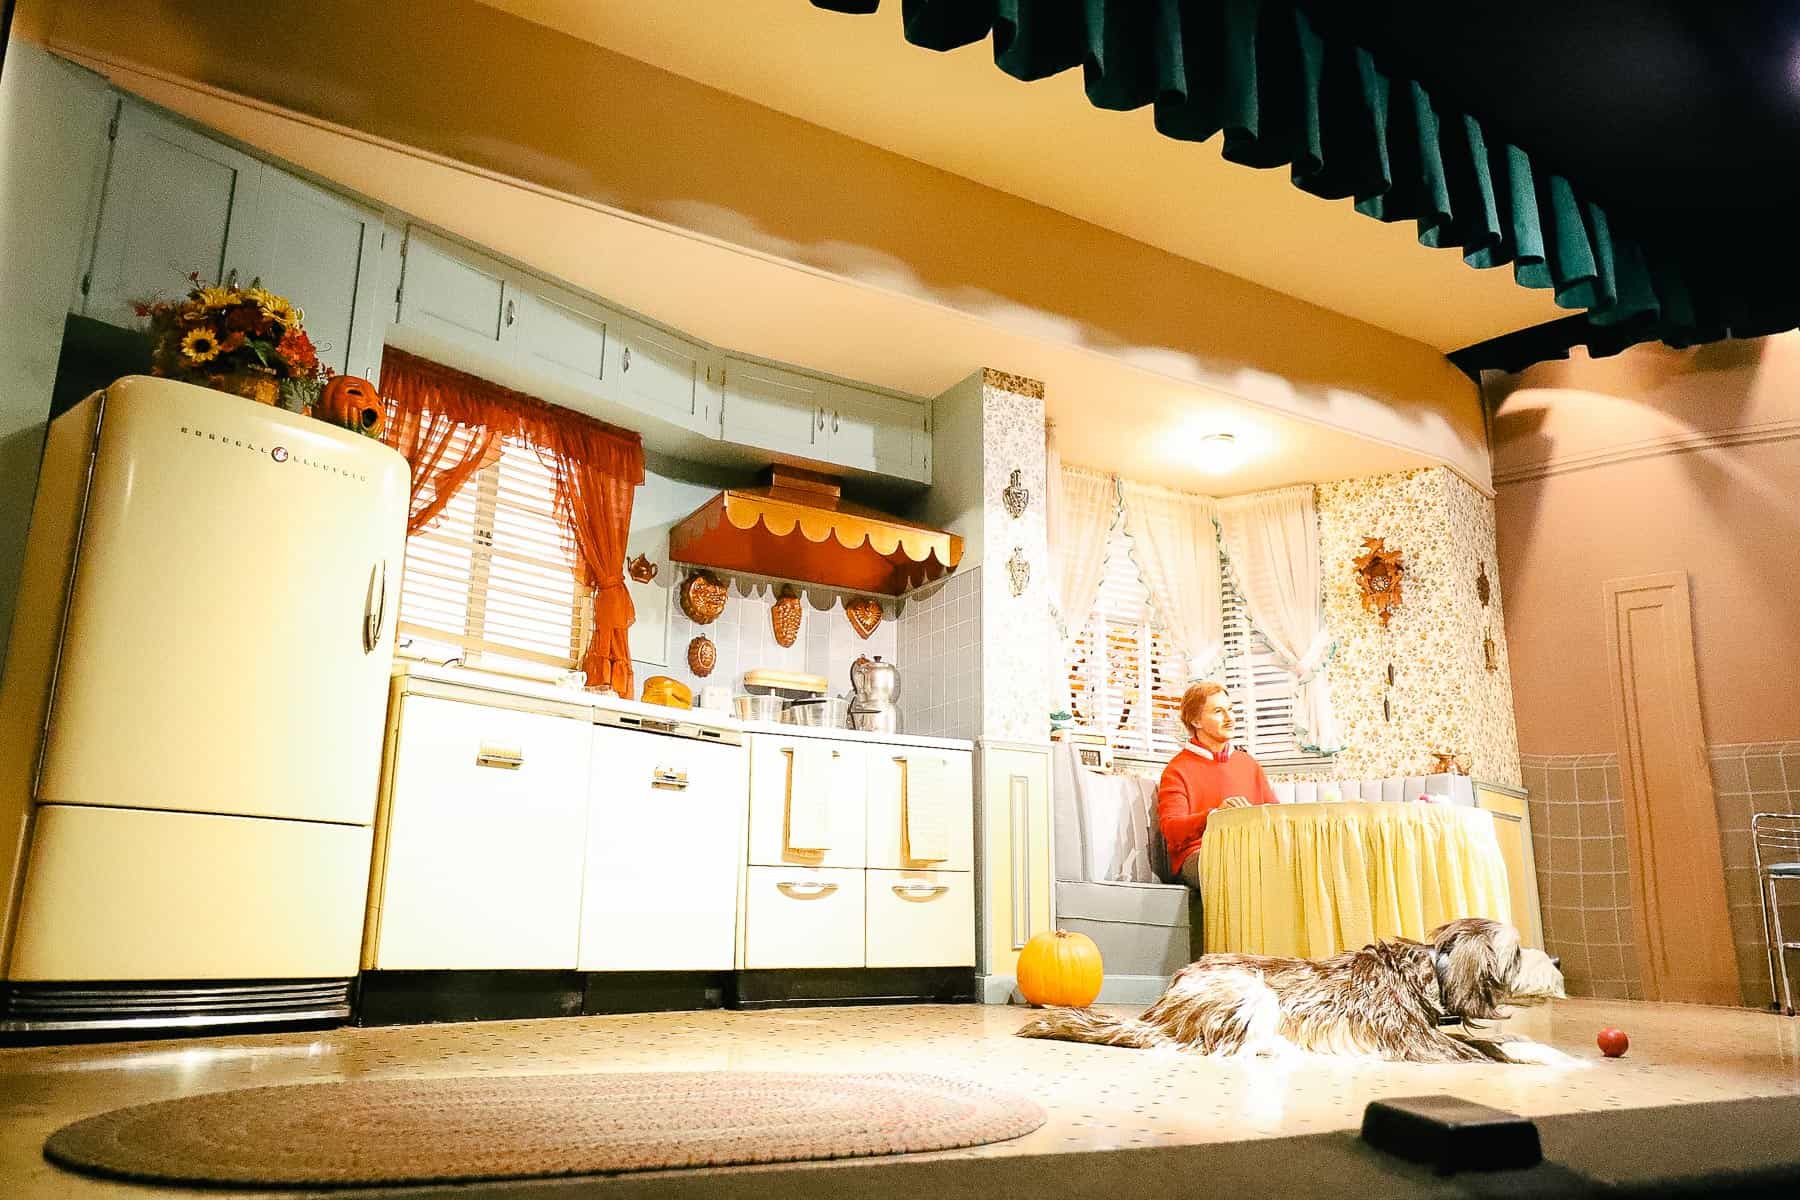 John and Rover in the updated kitchen in the 1940s. 